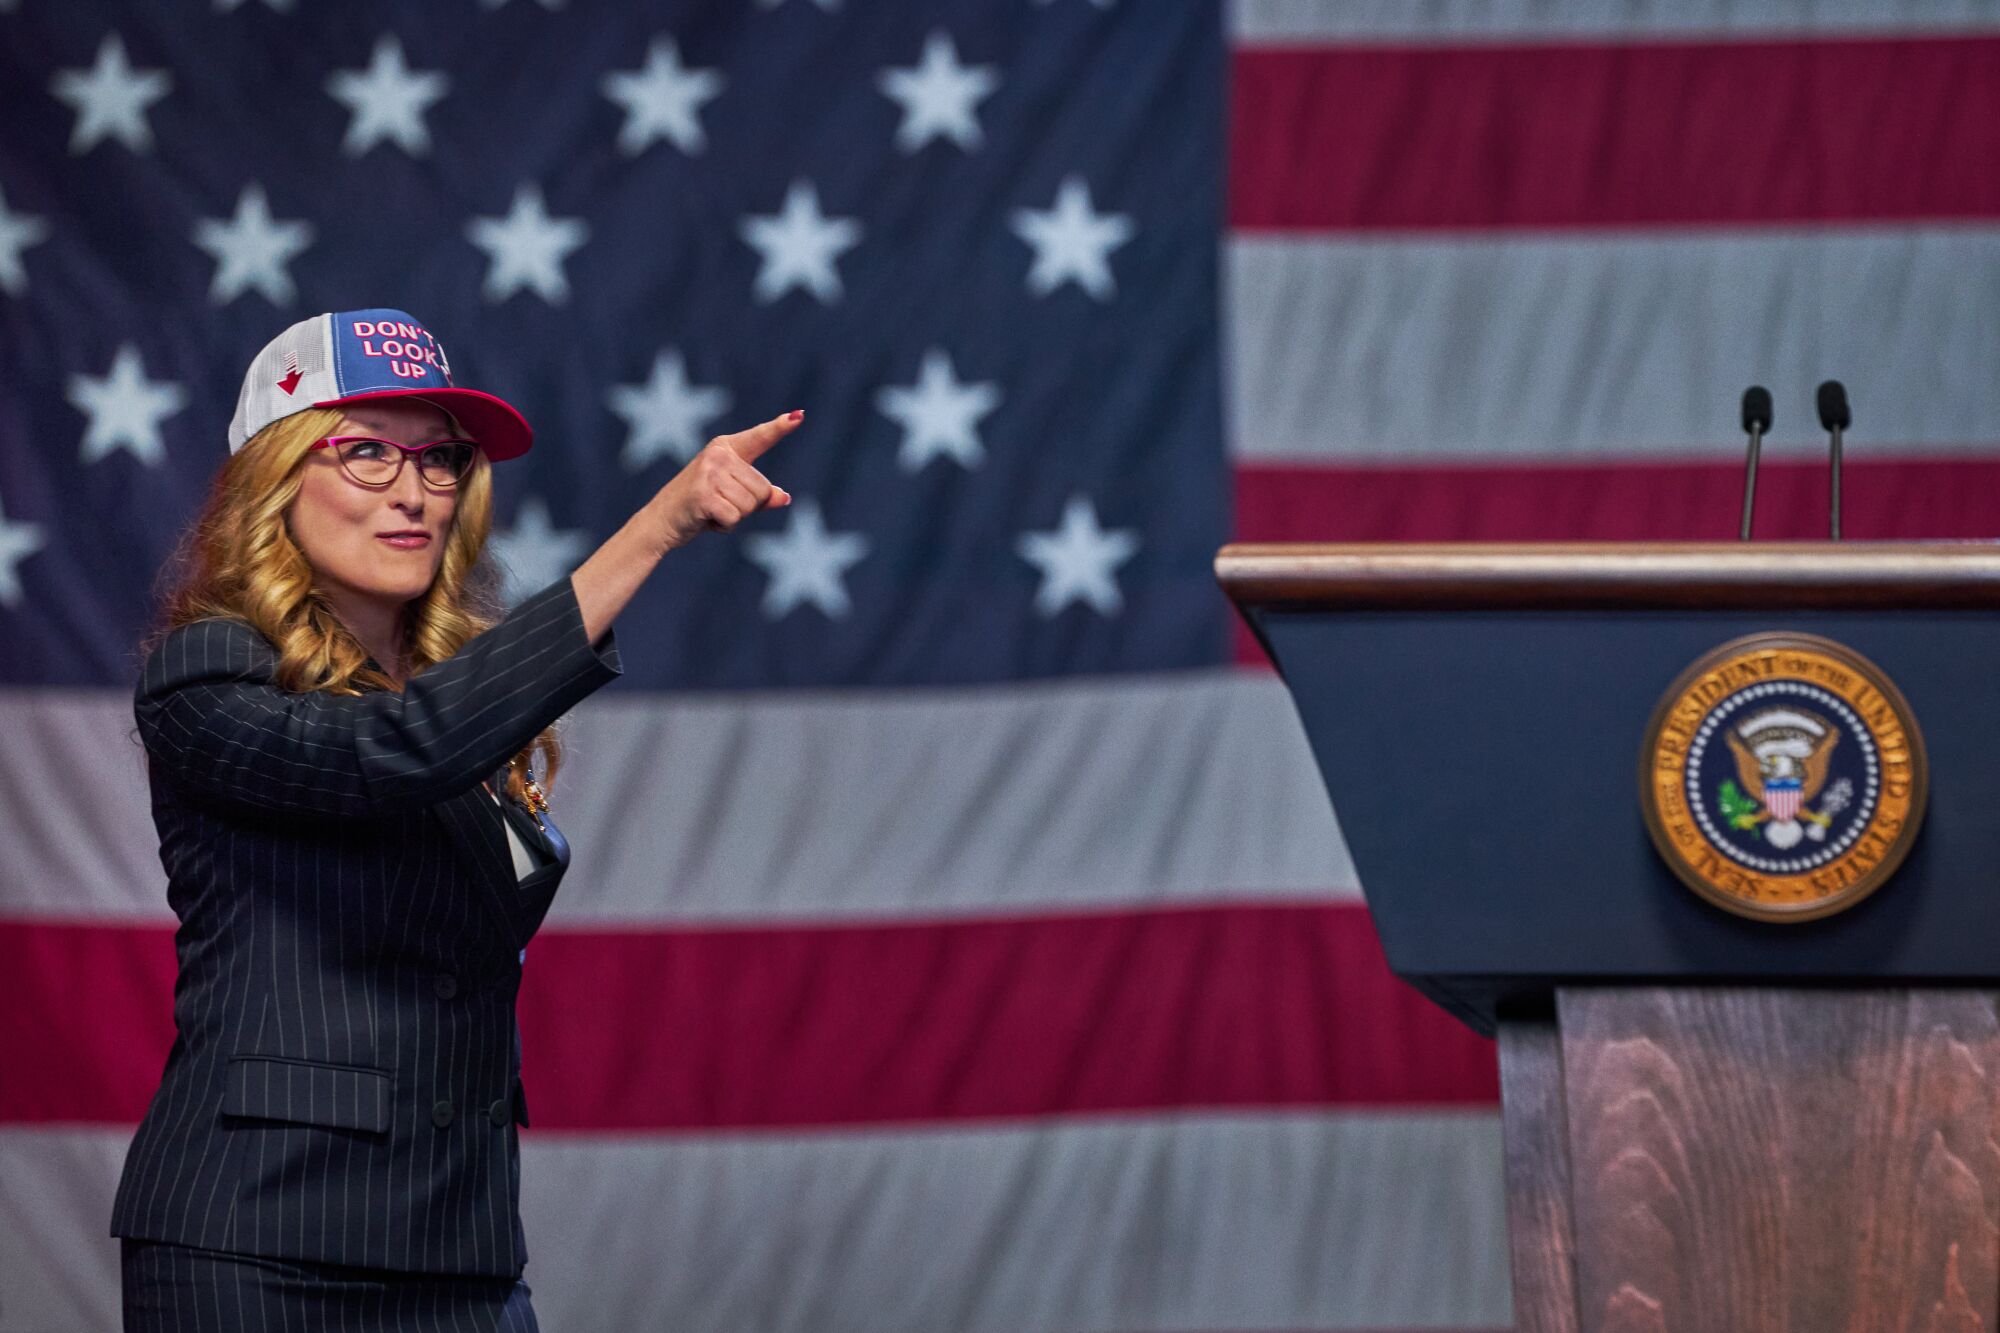 A woman in a hat pointing in front of a giant American flag